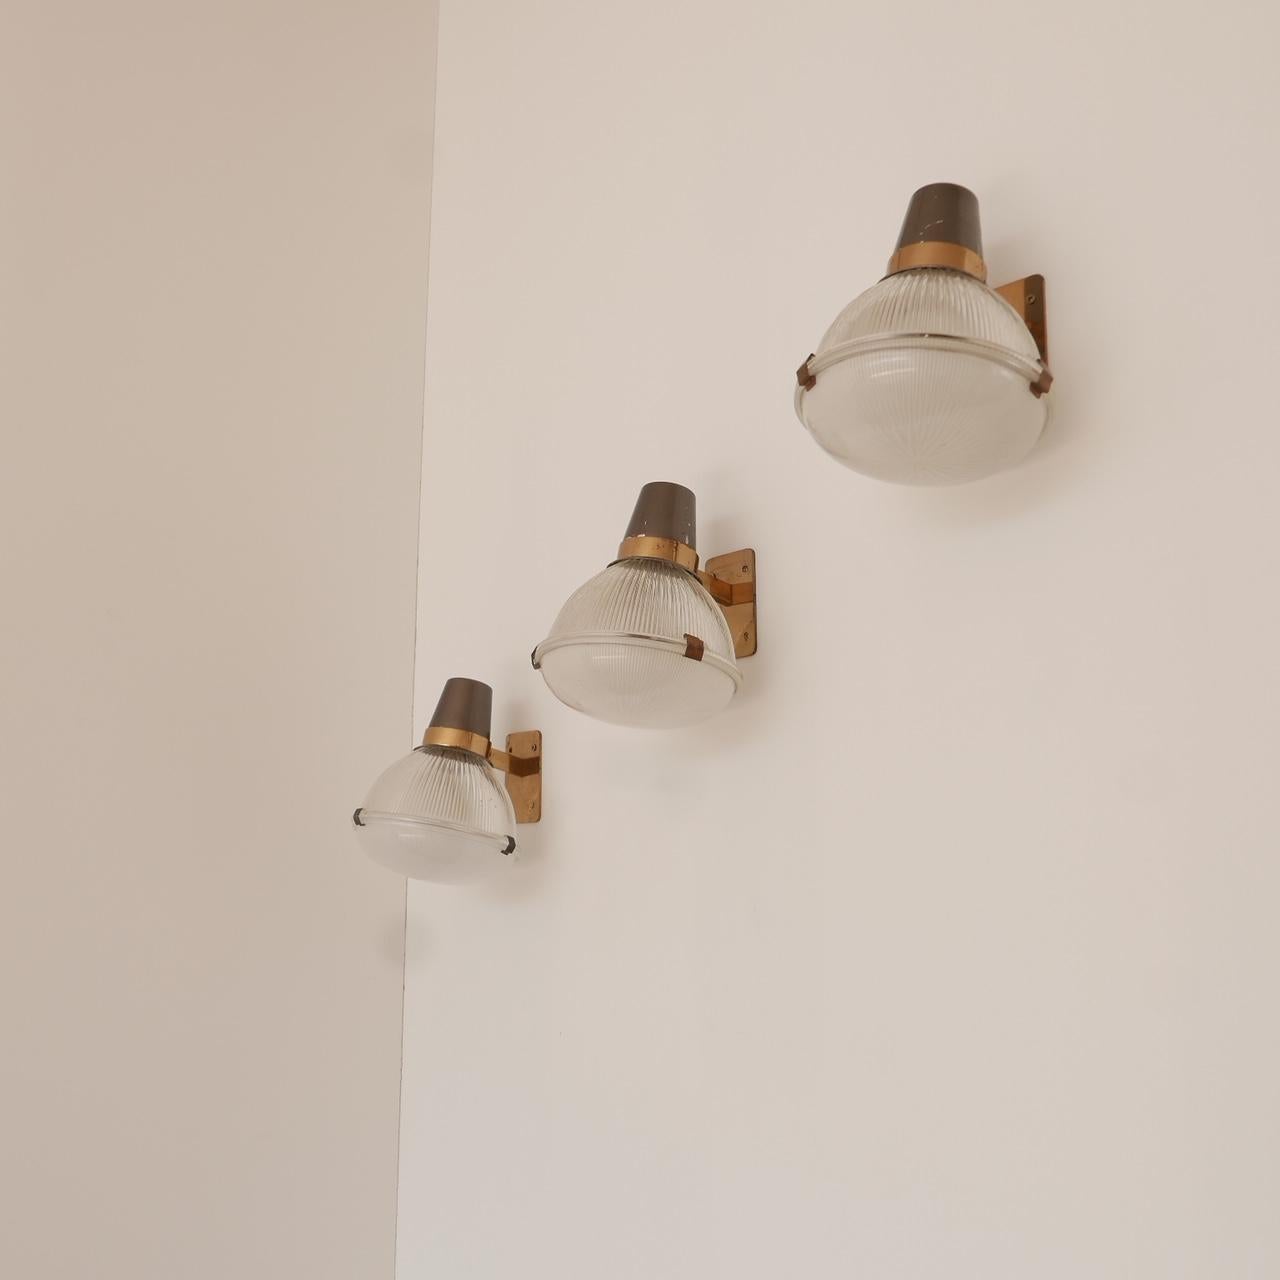 *3 available 
Italian Midcentury wall lights by Ignazio Gardella for Azucena,

circa 1960s, Italy.

They can be hung up or down.

LP6 model.

Glass and brass. Re-wired and PAT tested. 

Generally good condition, some clips lacking, some loss to